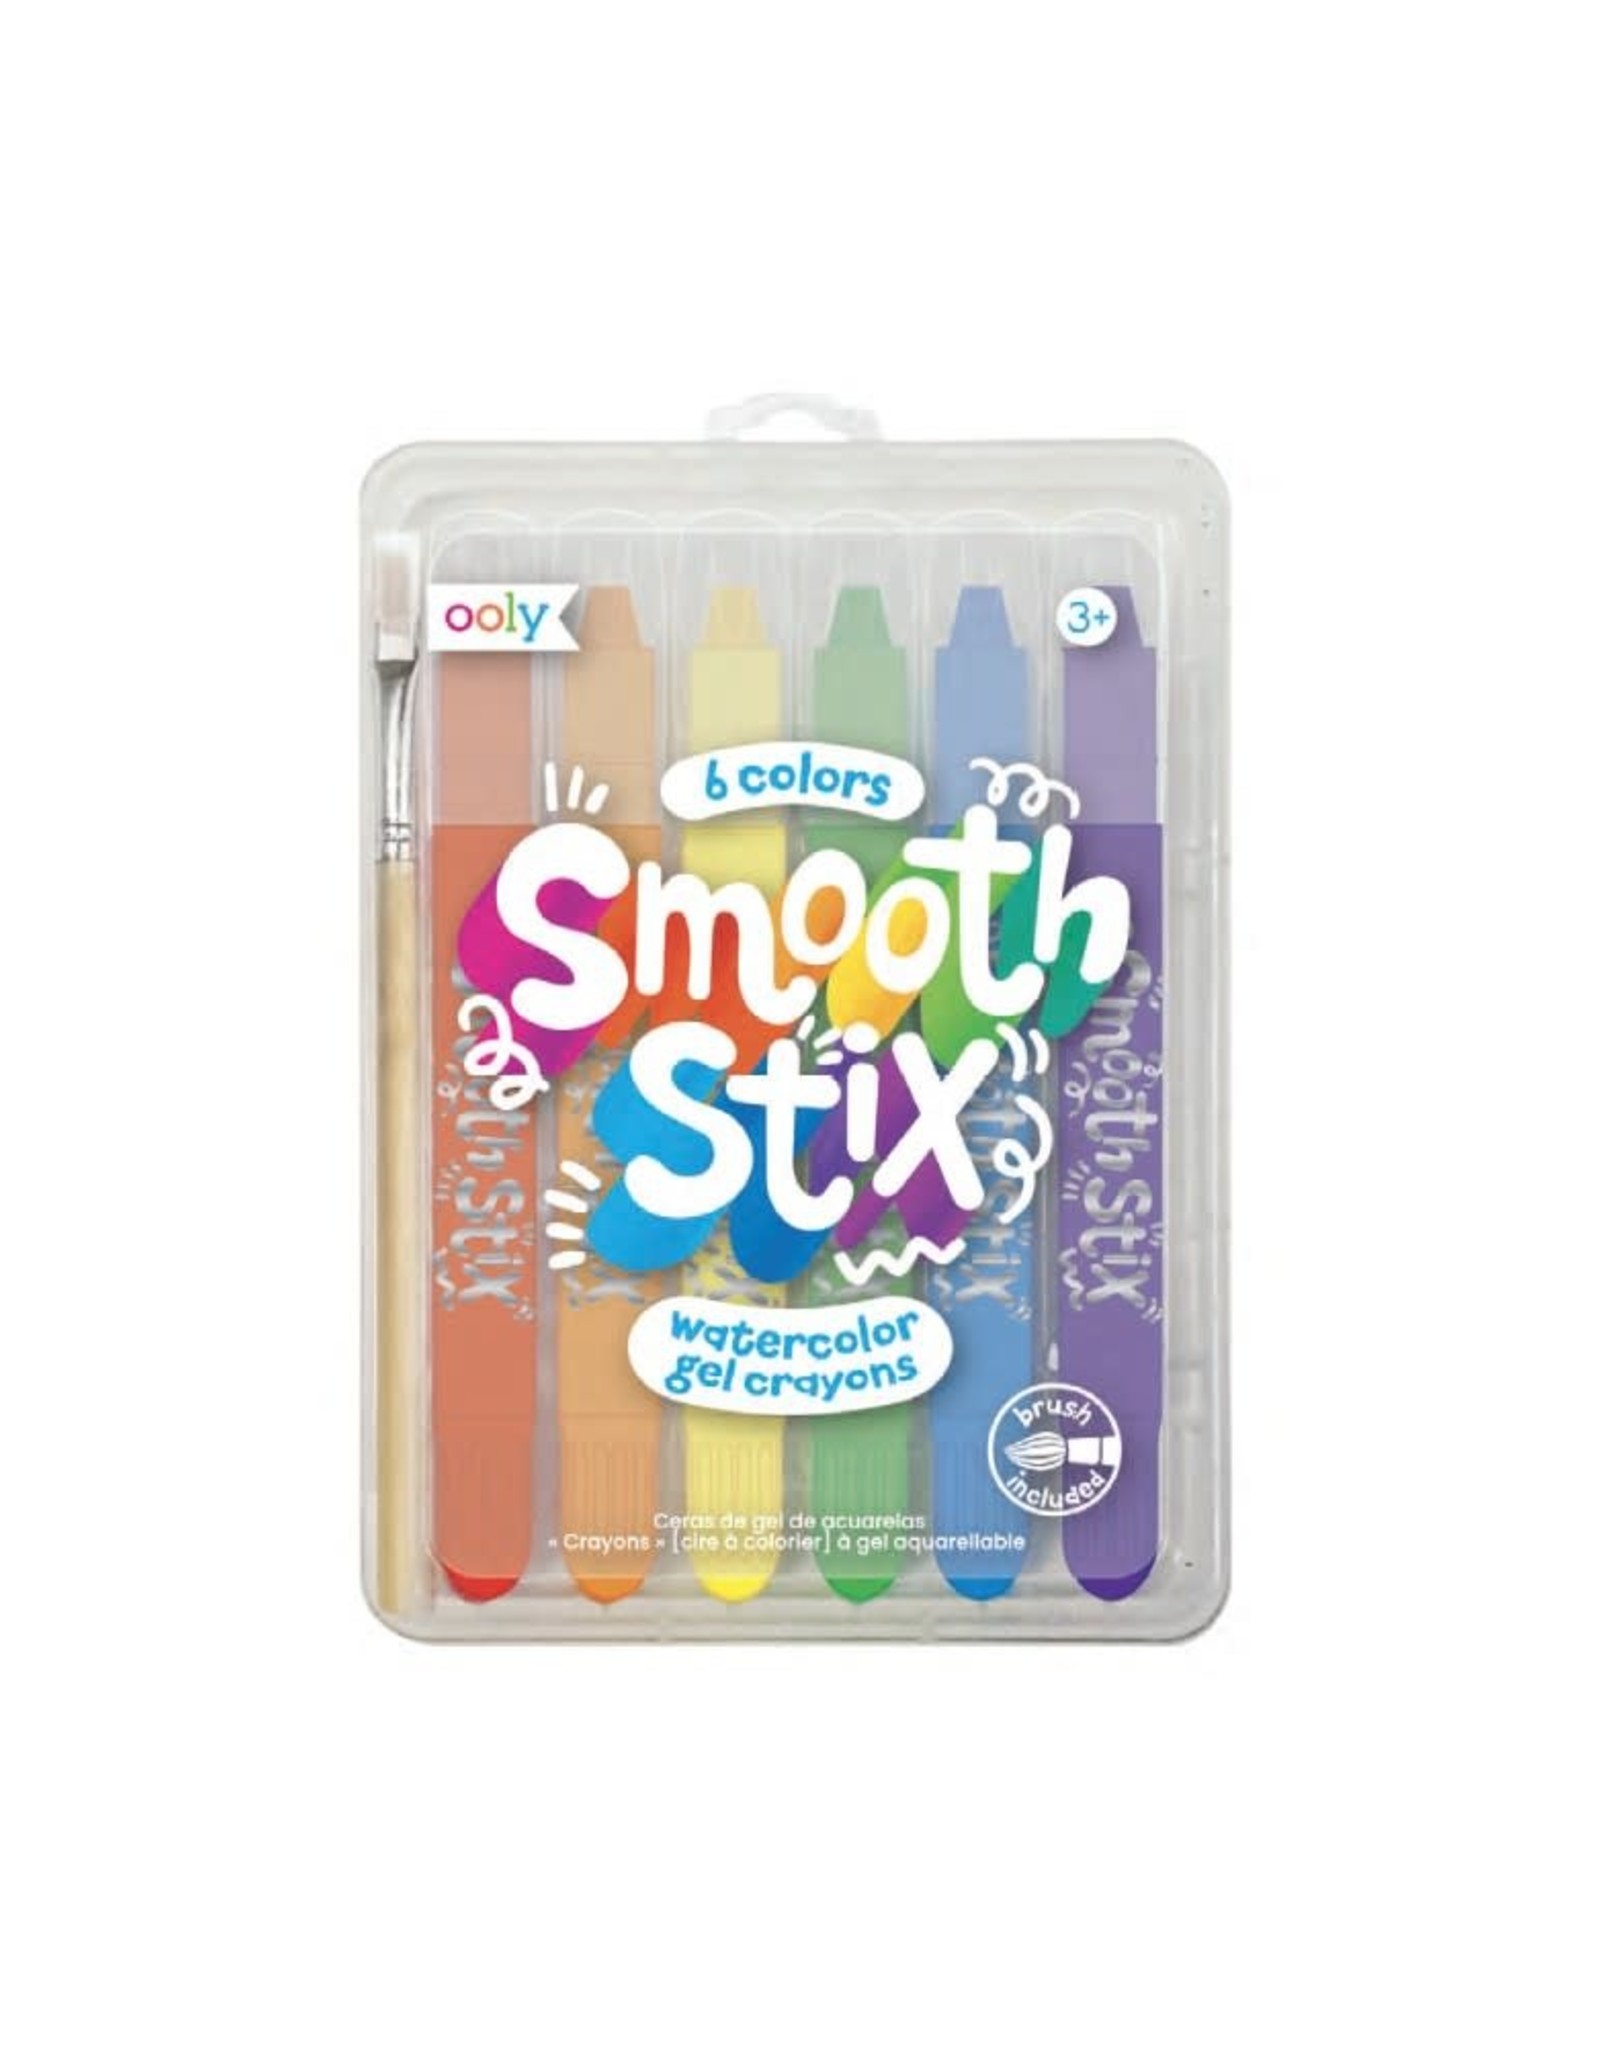 OOLY SMOOTH STIX WATERCOLOUR GEL CRAYONS - 7 PC SET